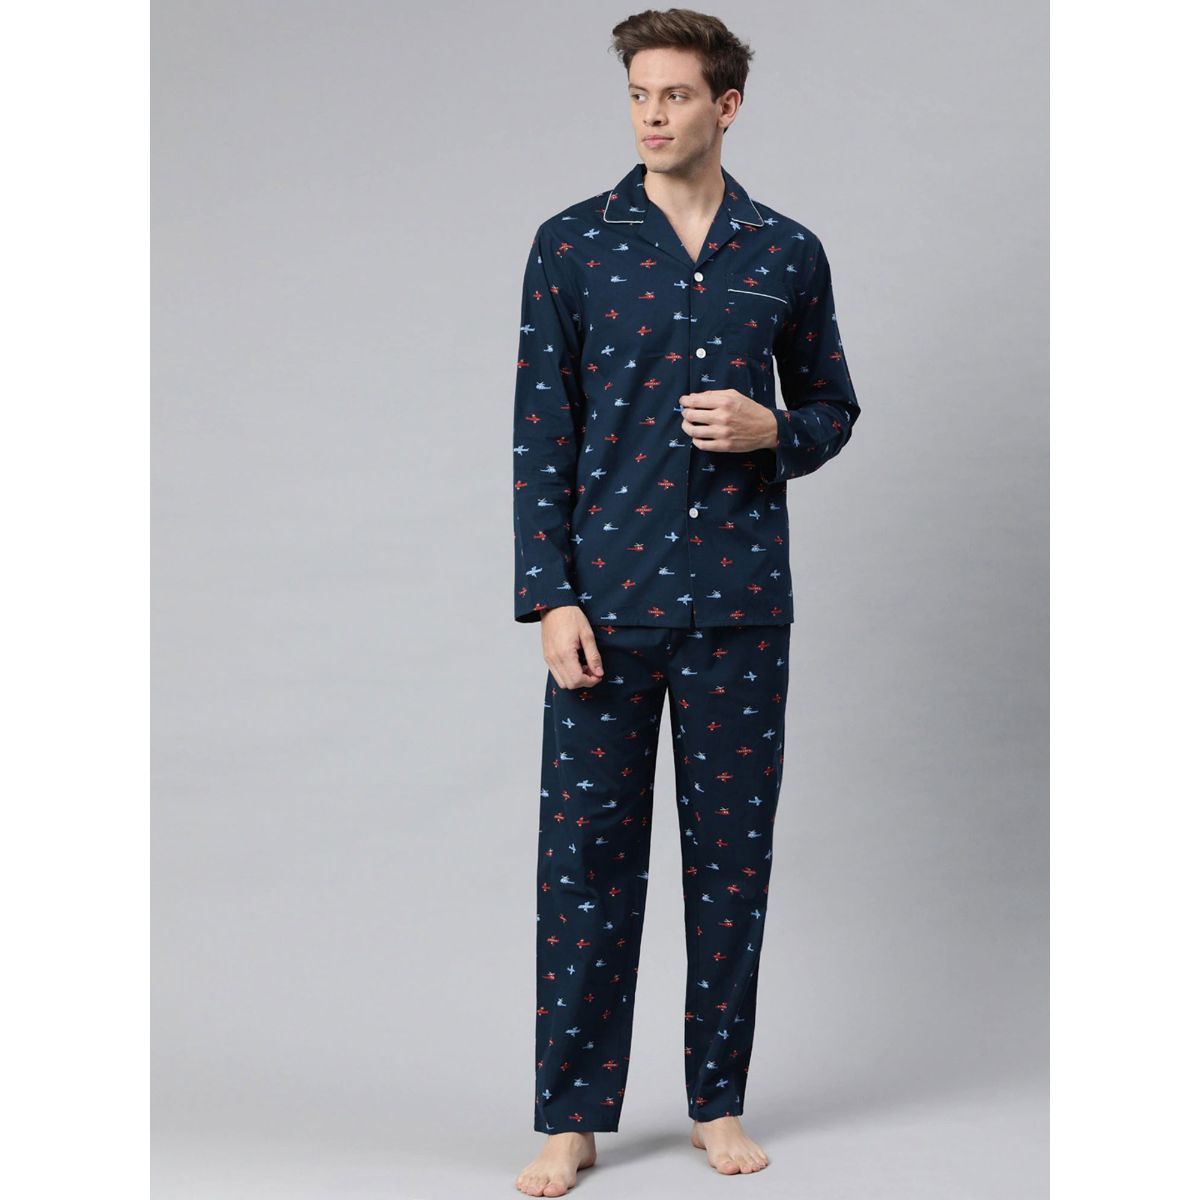 The Bear House Men Navy Blue Red Printed Night Suit: Buy The Bear ...